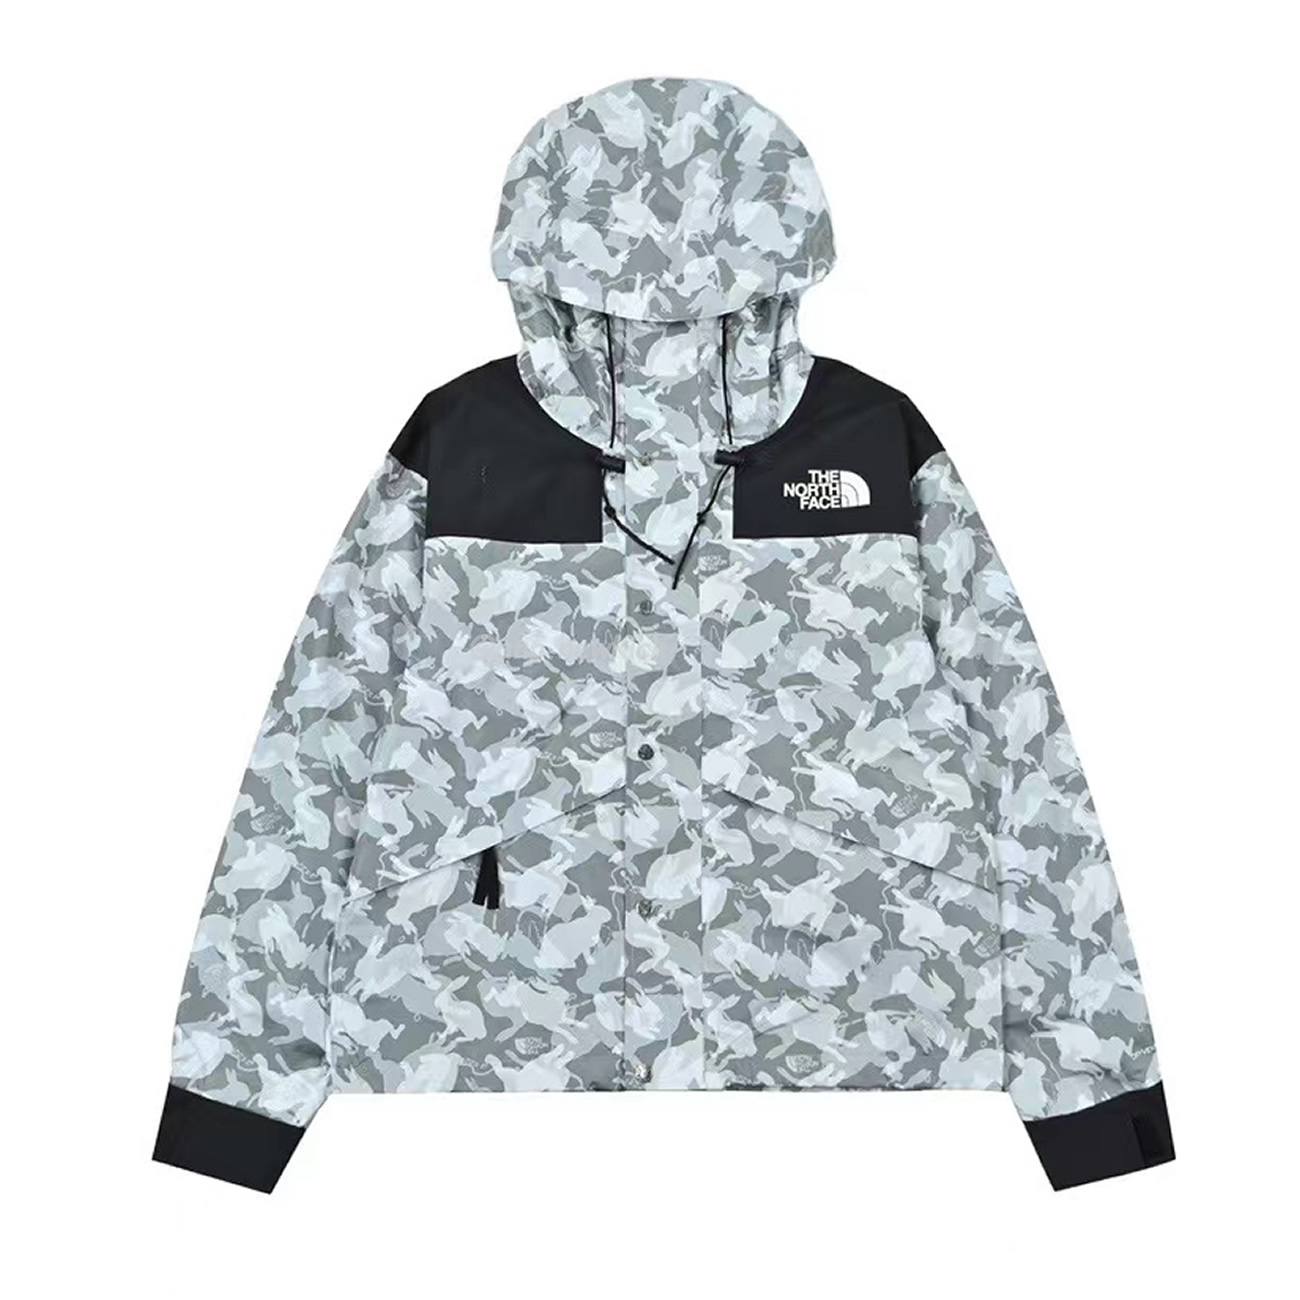 The North Face M 86 Retro Mountain Jacket Year Of The Rabbit Limited (5) - newkick.org